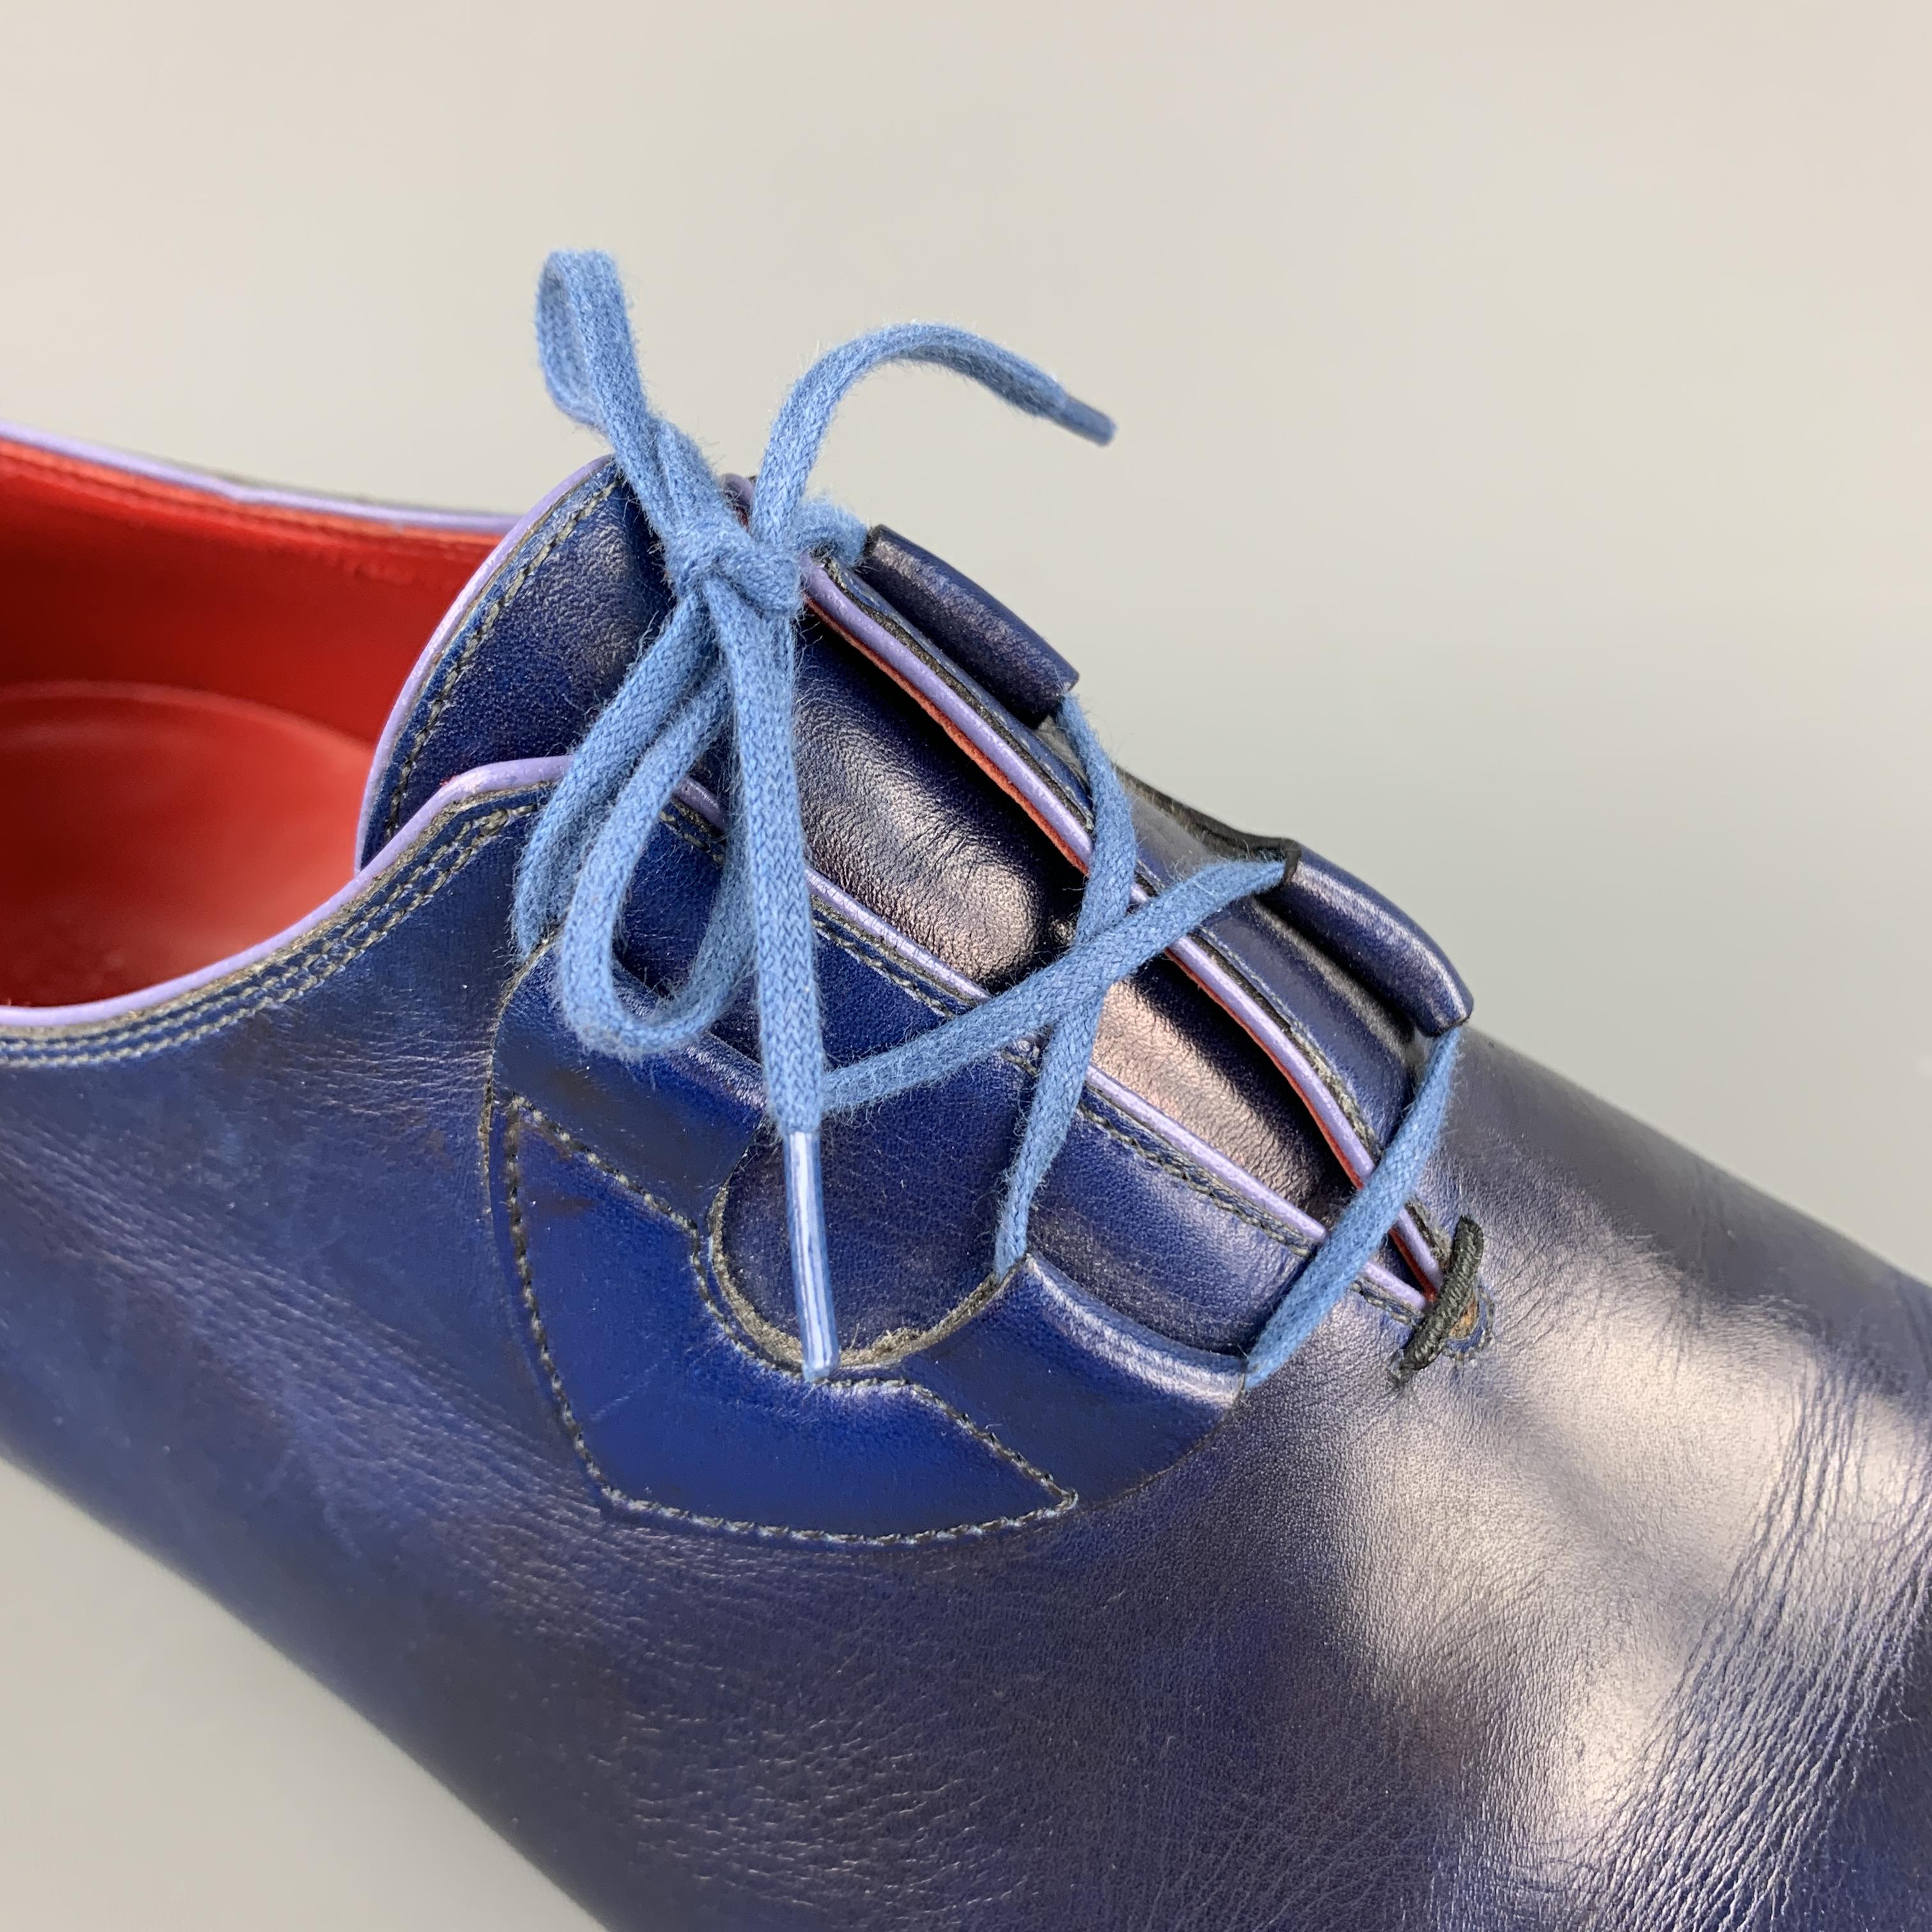 CORTHAY SERGIO dress shoes come in antique effect blue leather with a lace up front. With box & shoe trees. Made in France.

Excellent Pre-Owned Condition.
Marked: 10.5

Outsole: 11.75 x 4 in.
